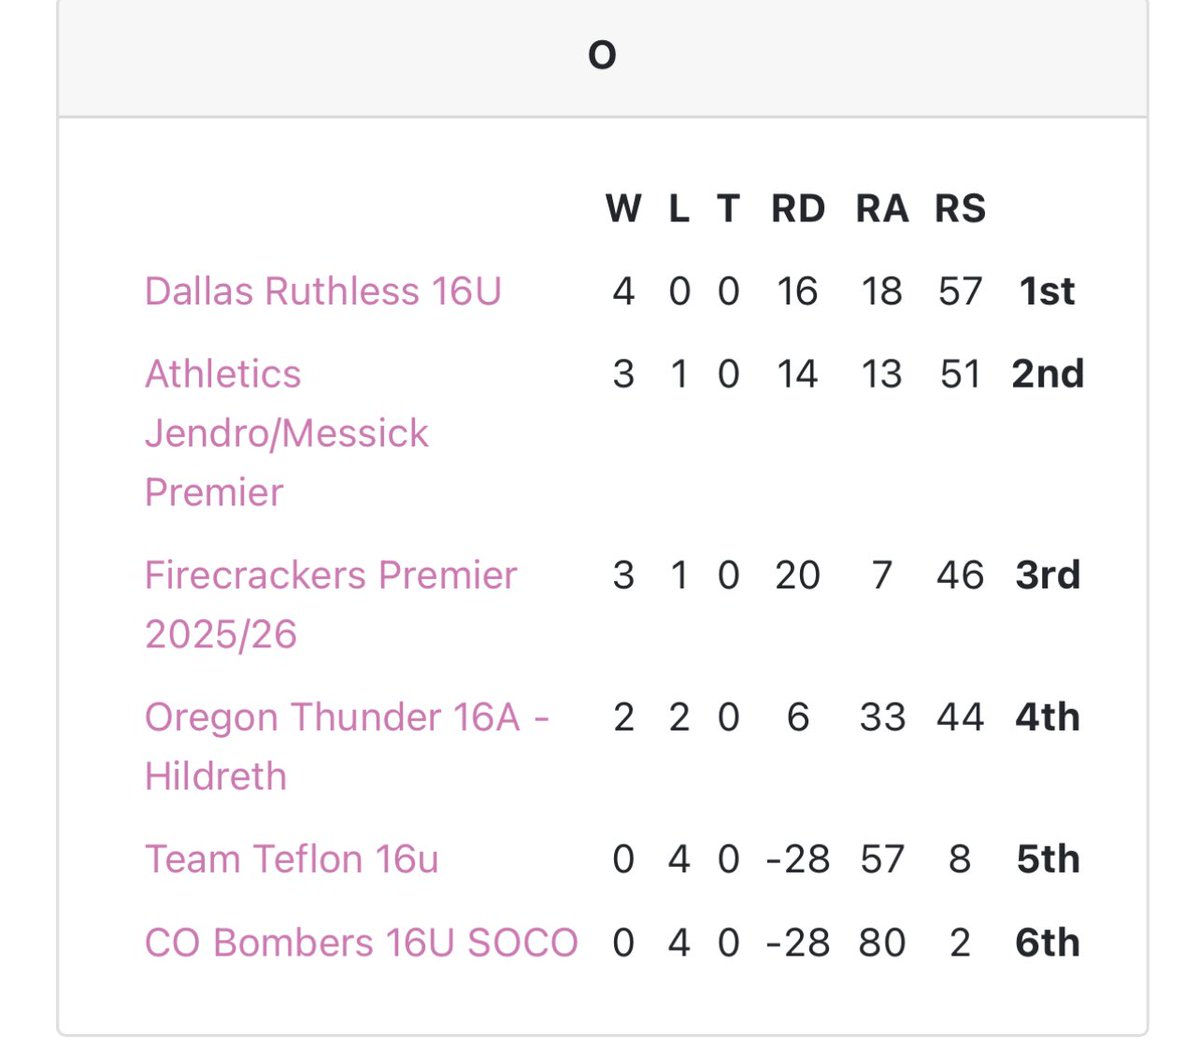 We are having a blast in Colorado so far! After 2 days of Pool Play, we have finished 1st in our pool heading into the Mt. Elbert Bracket. We are also in several AGL live leaderboard categories! Let’s get it RuCrew! 🖤💚